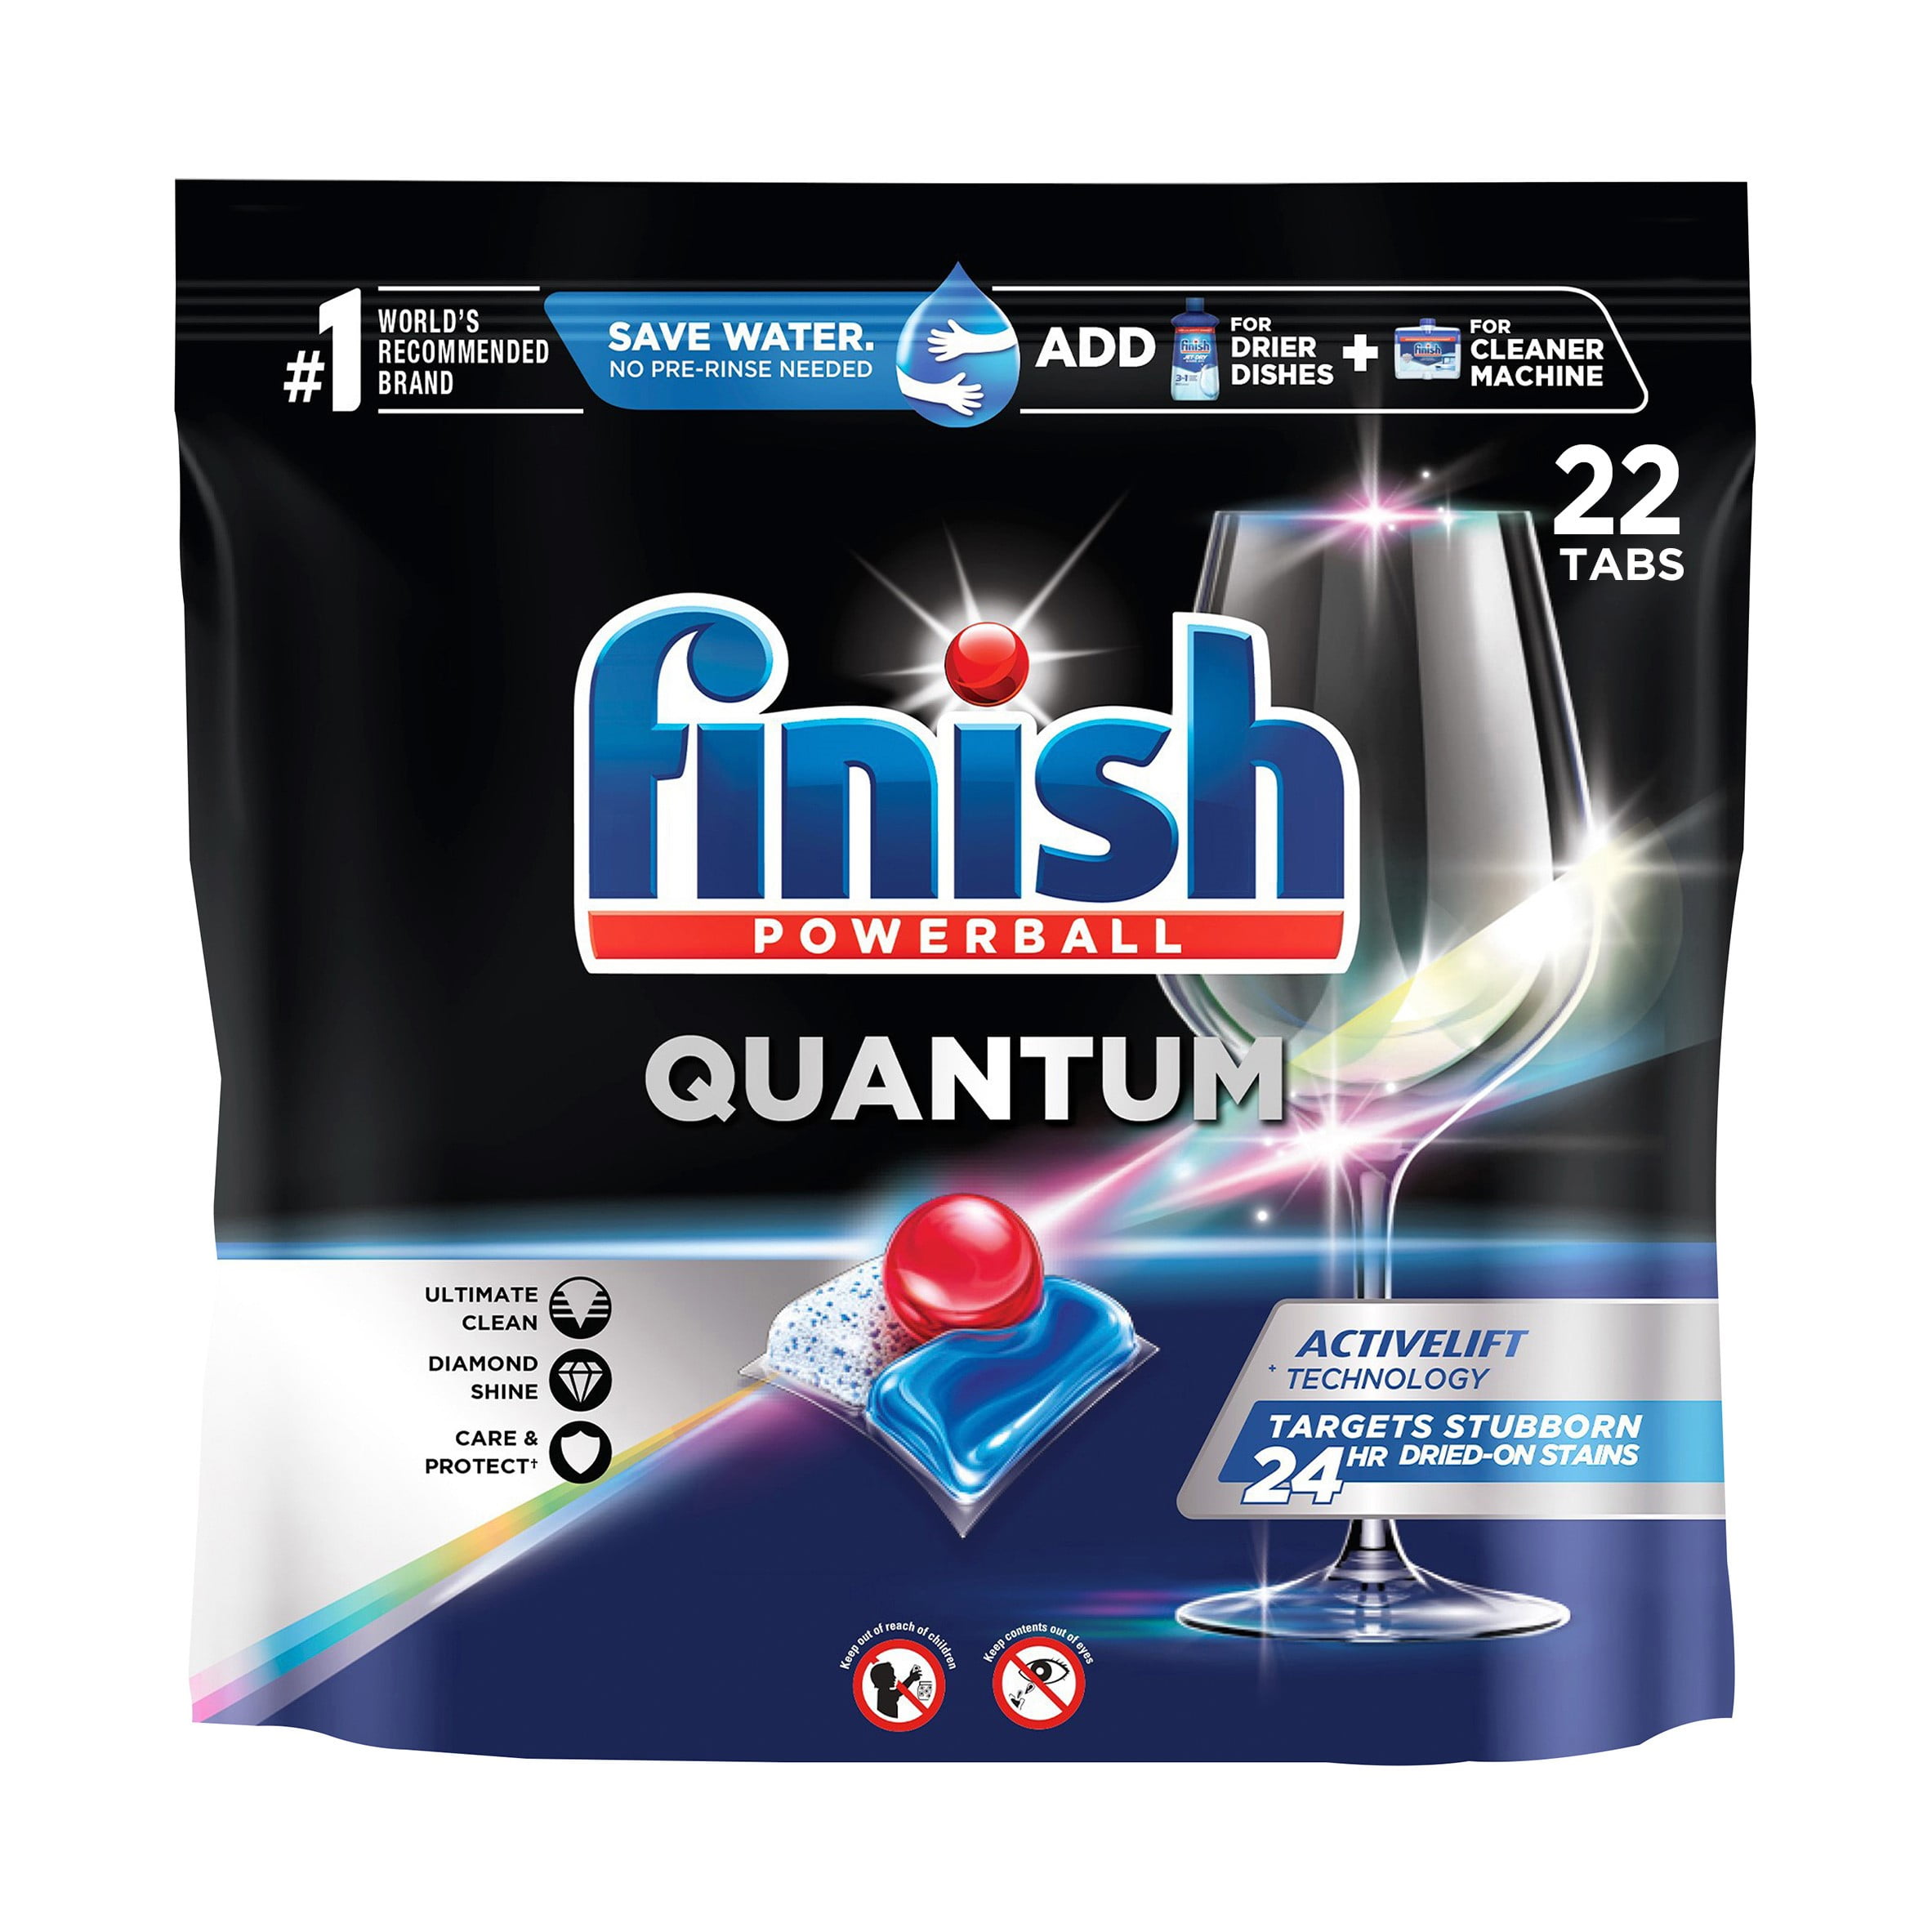 Finish Powerball Automatic Dishwasher Detergent, Quantum, With Activblu Technology, Tabs - 22 tabs, 9.7 oz